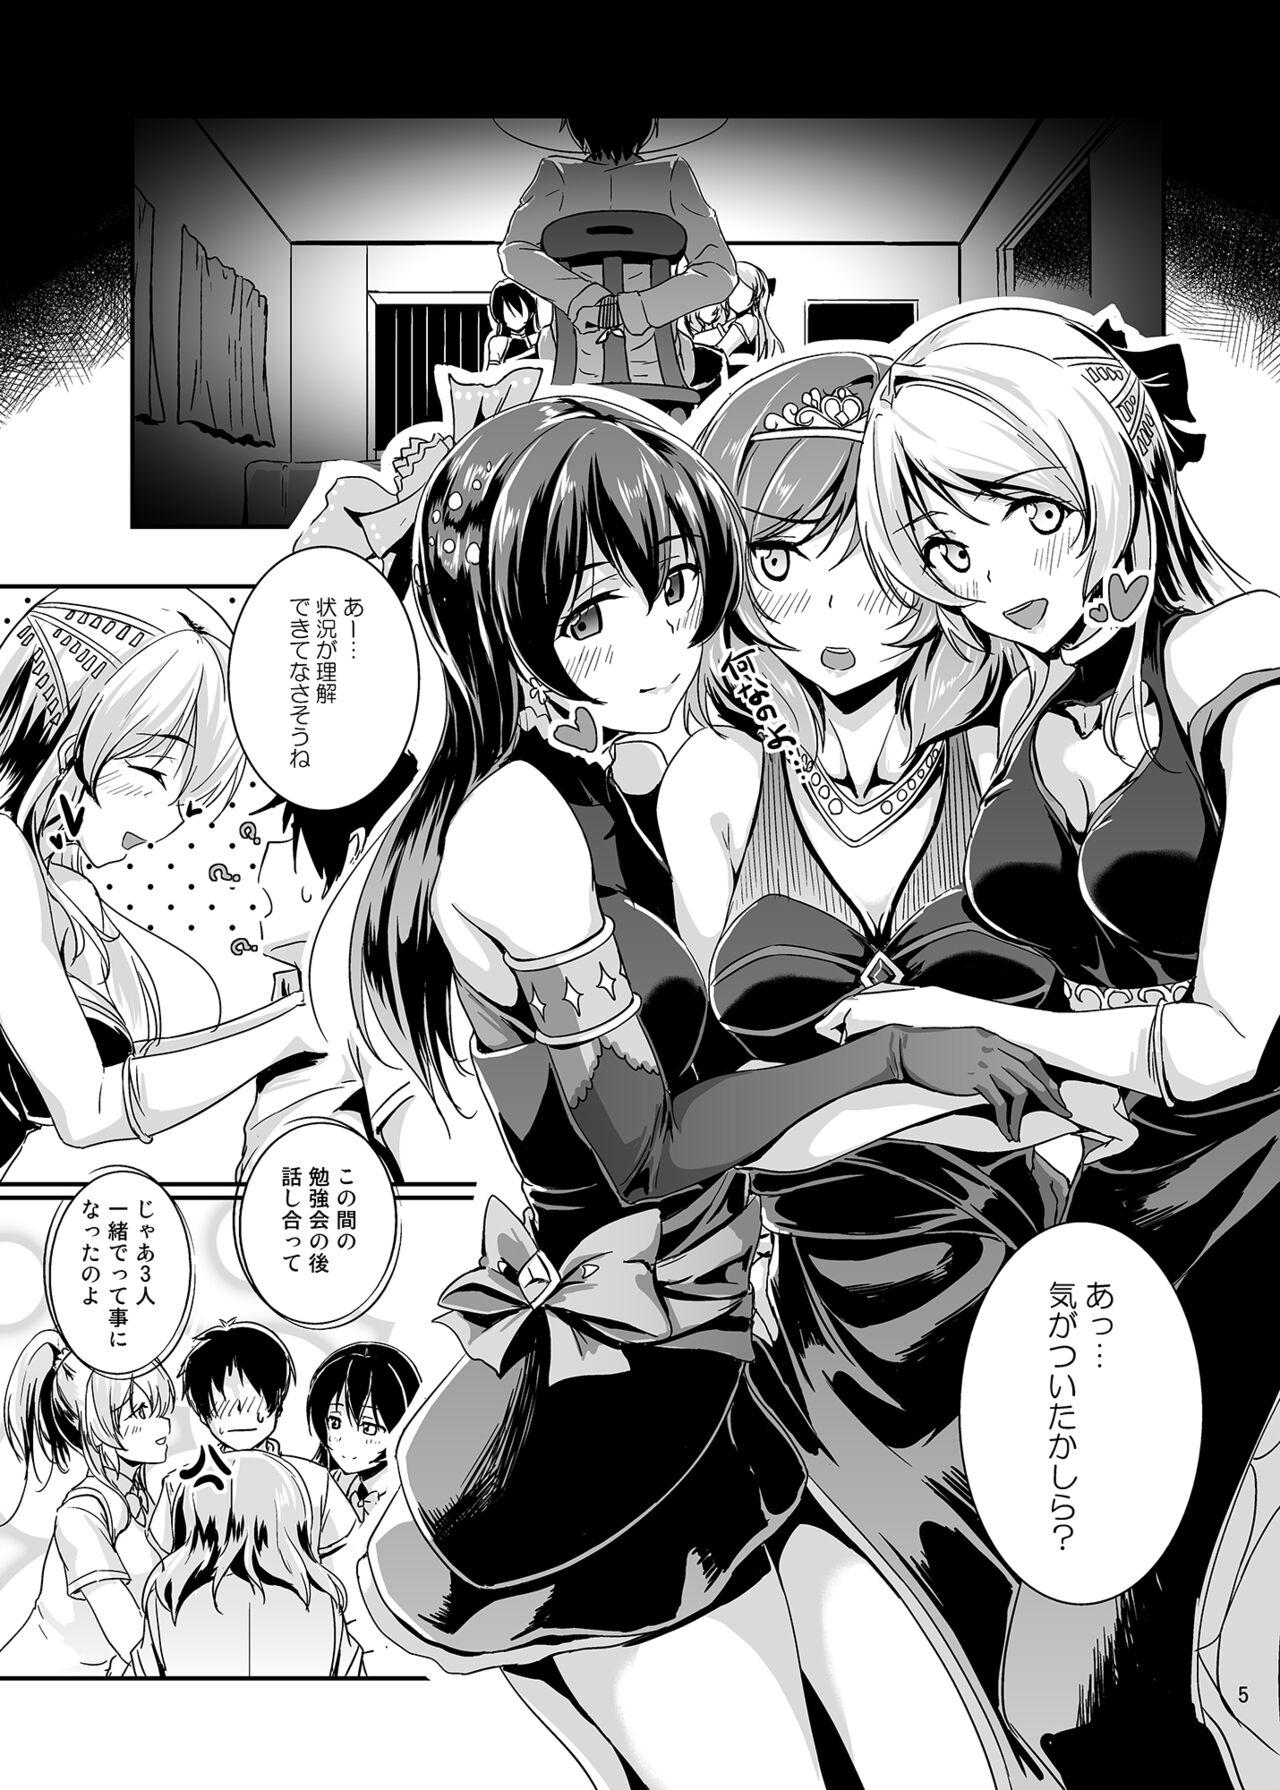 Actress secret in my heart - Love live Innocent - Page 5